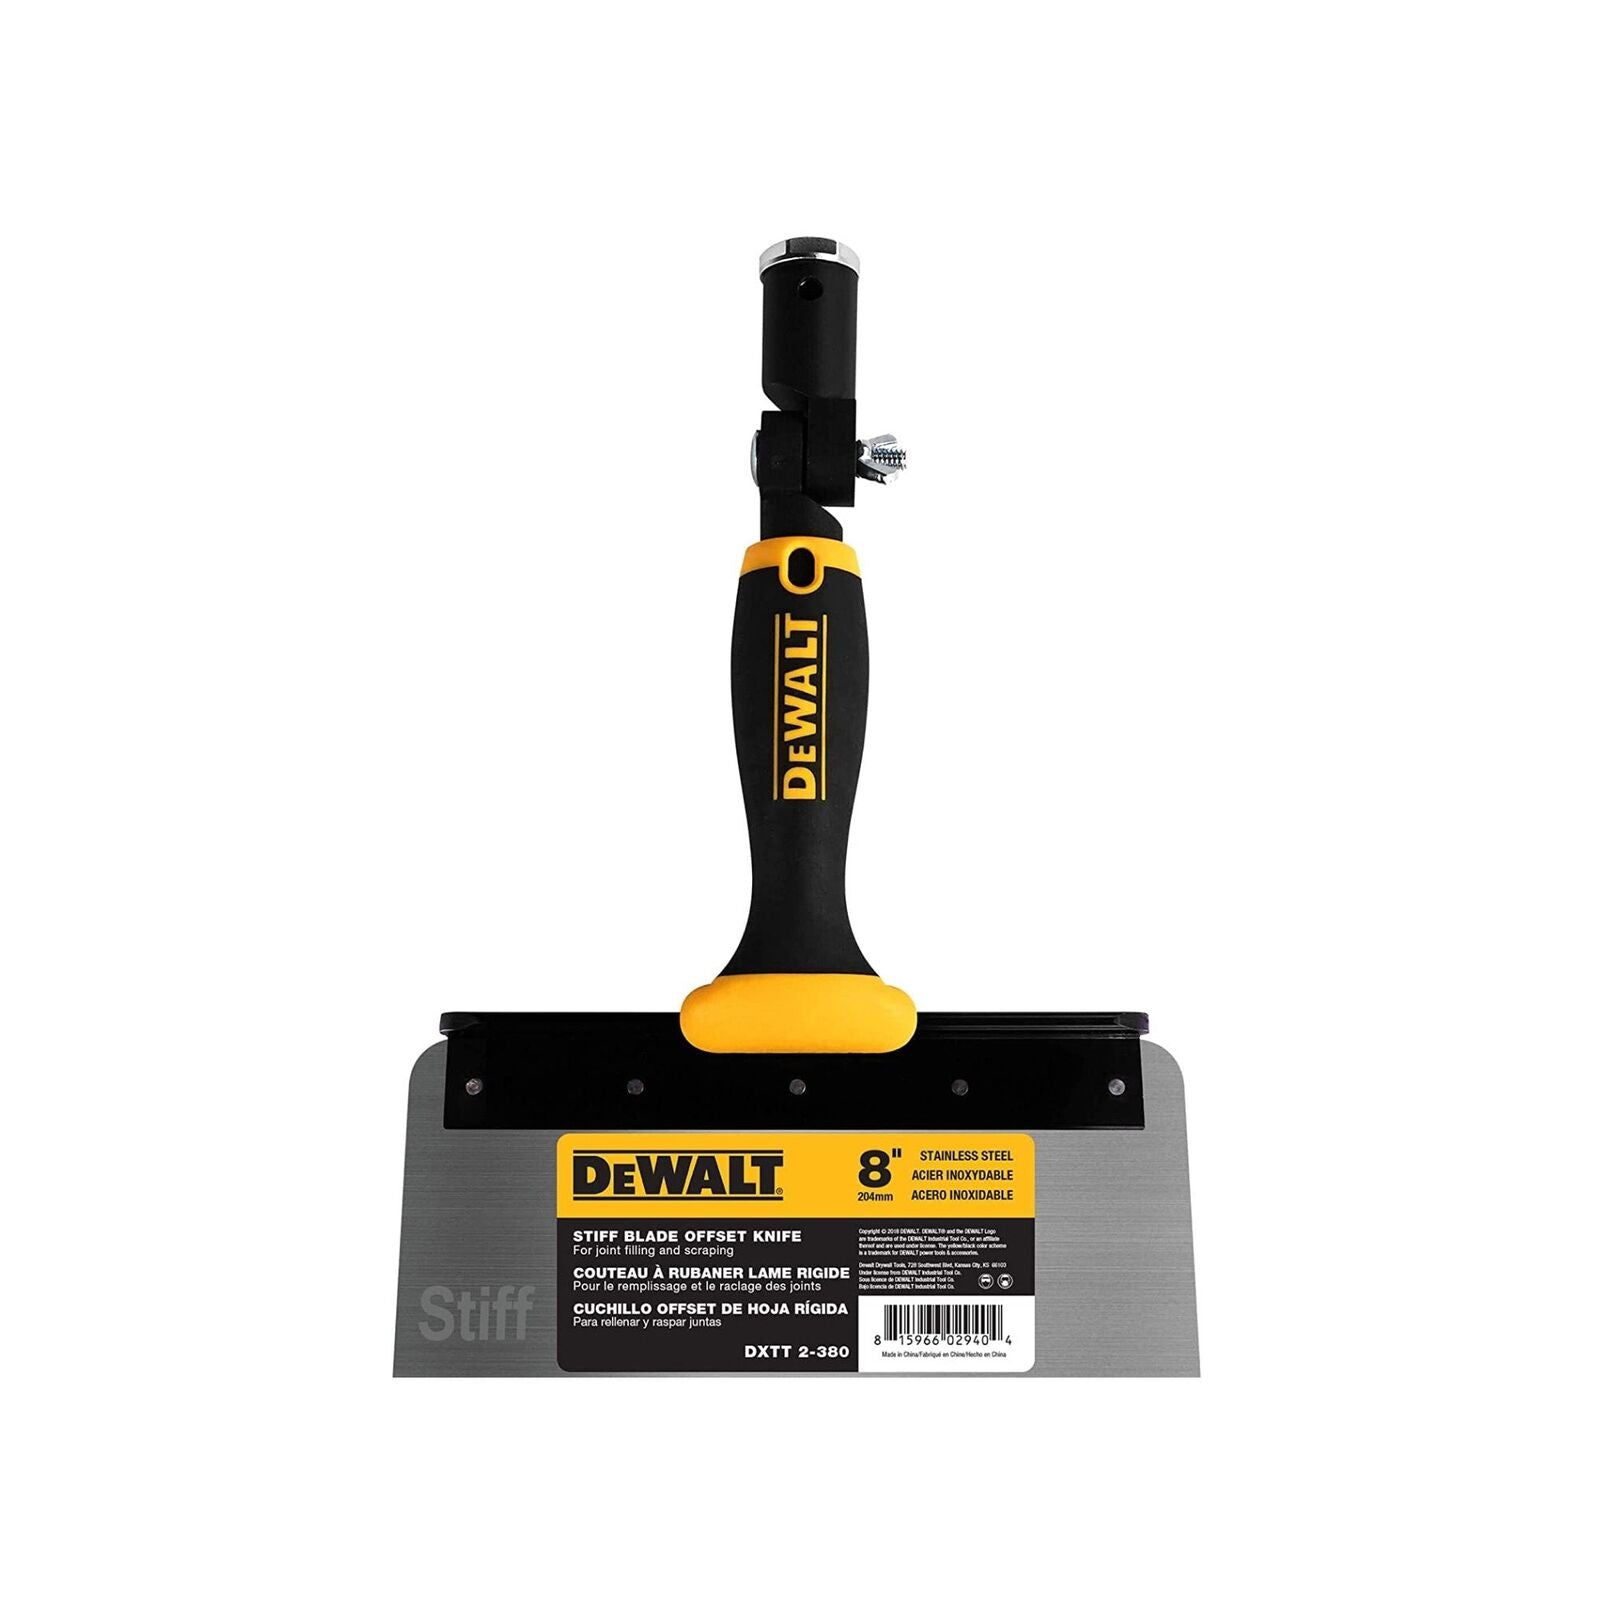 DeWALT Stainless Steel Offset Knife with Soft Grip Handle